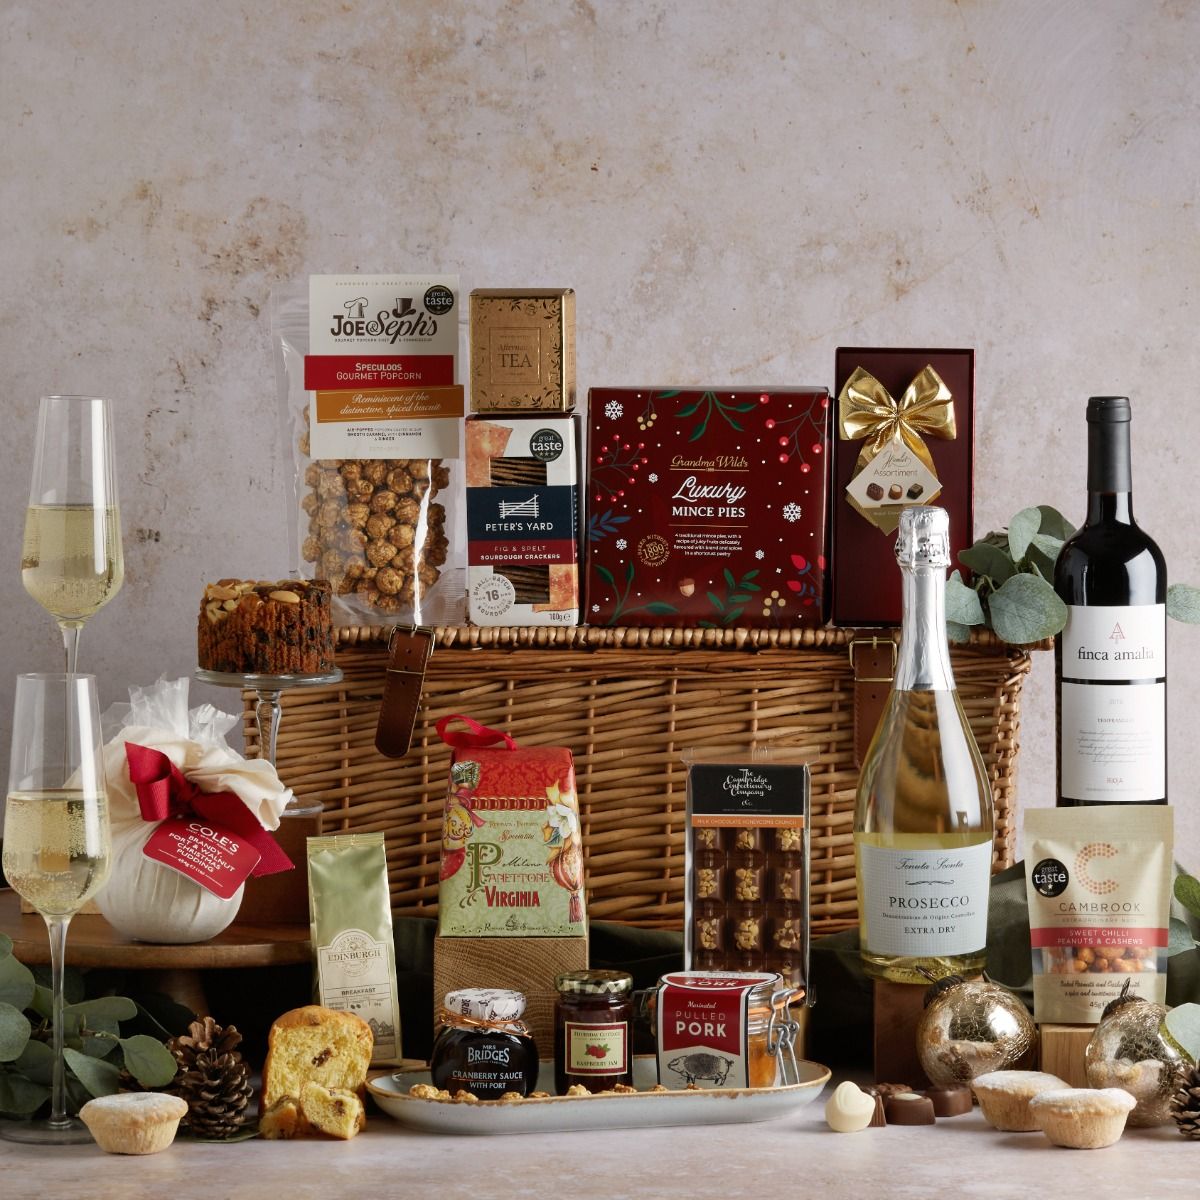 The Traditional Christmas Hamper with all of its contents on display and a wicker basket